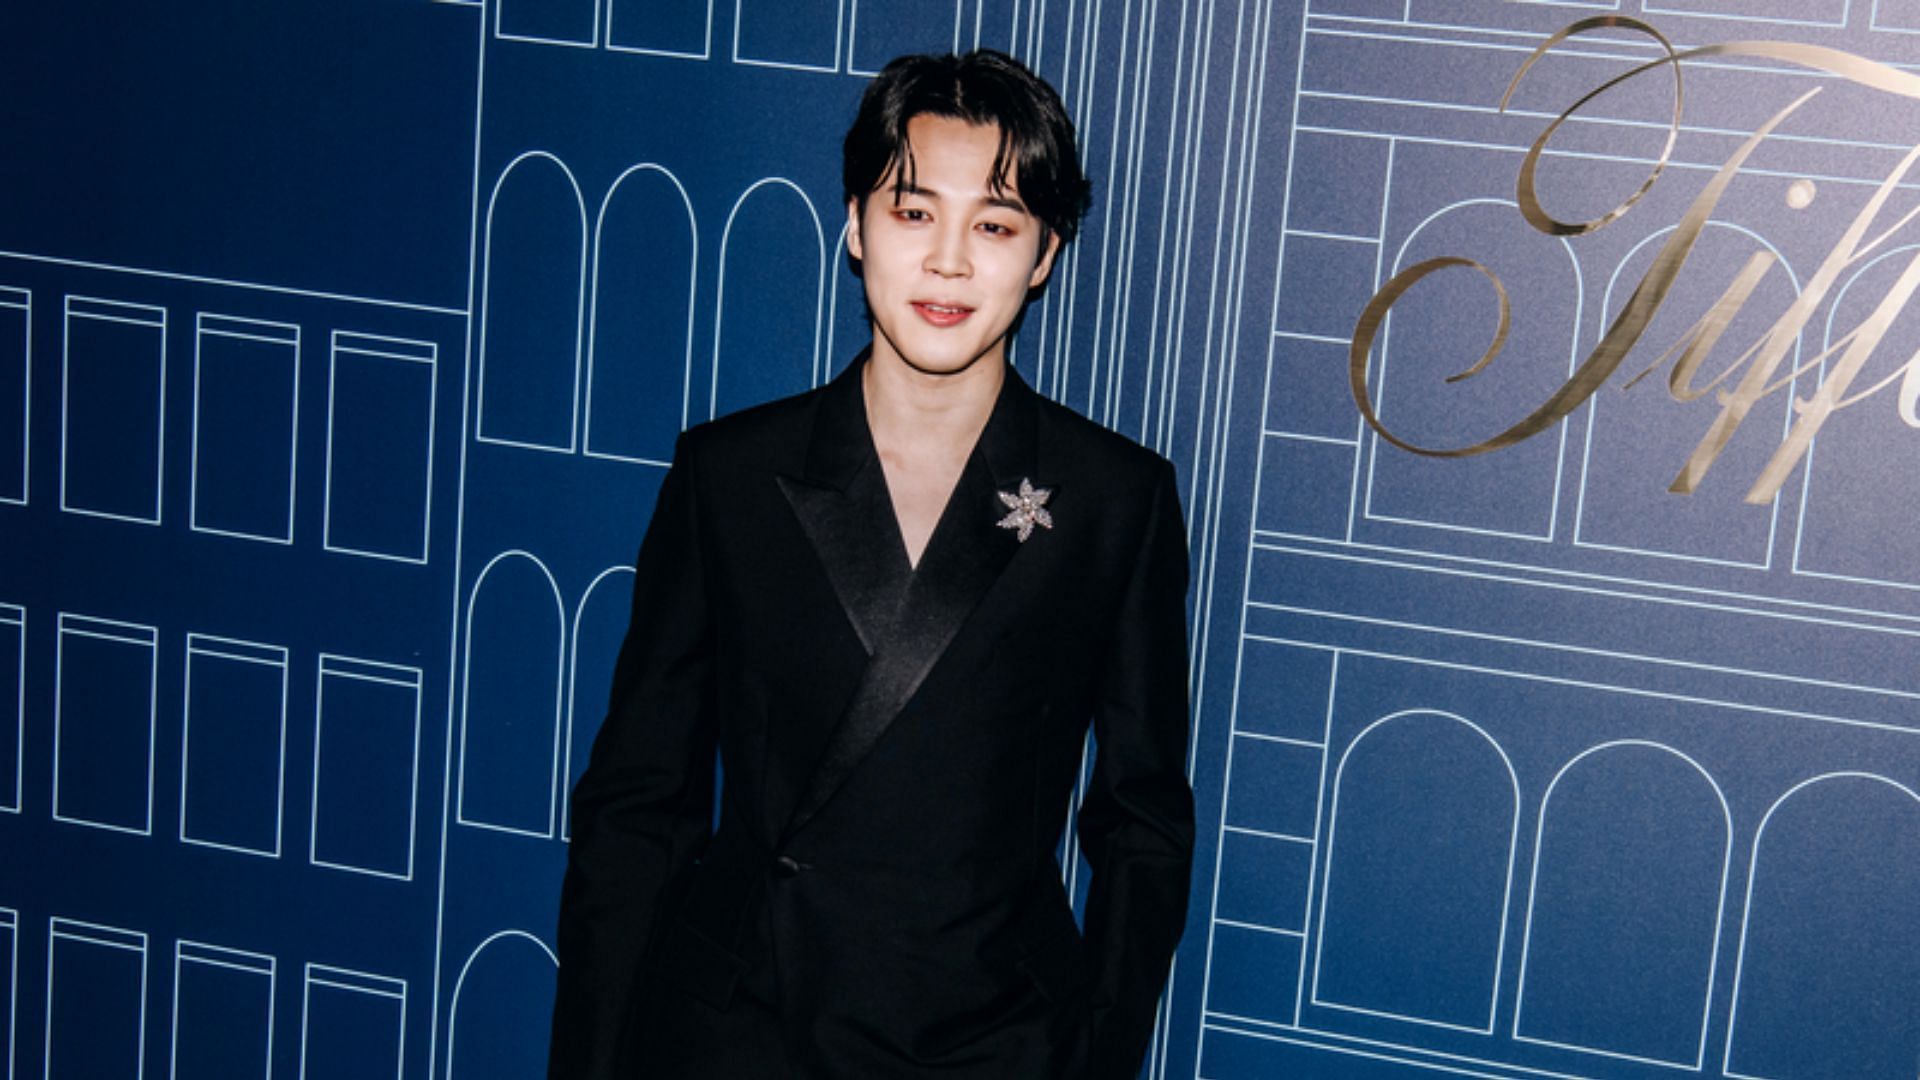 "Jimin at Met Gala OMG" Fans create a frenzy as BTS' Jimin is expected